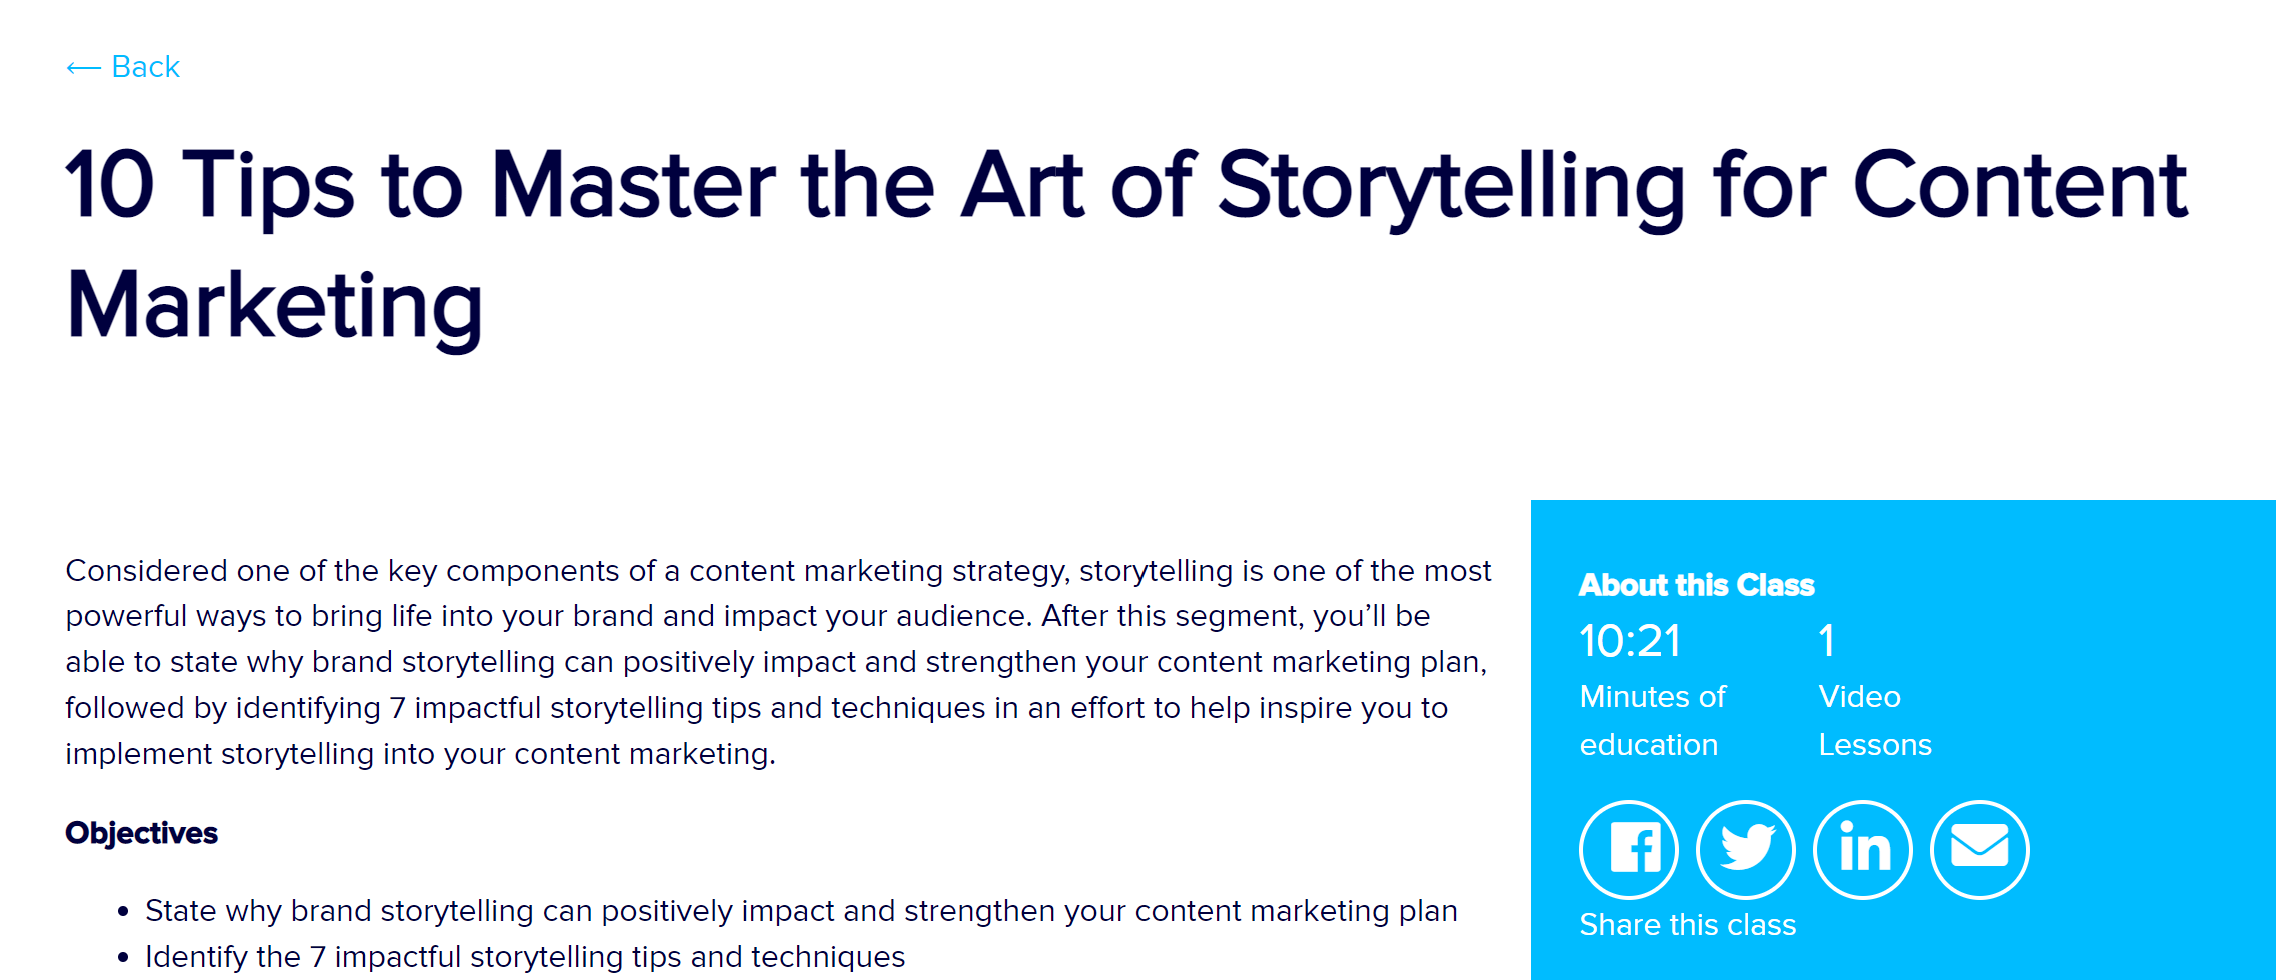 10 Tips to Master the Art of Storytelling for Content Marketing